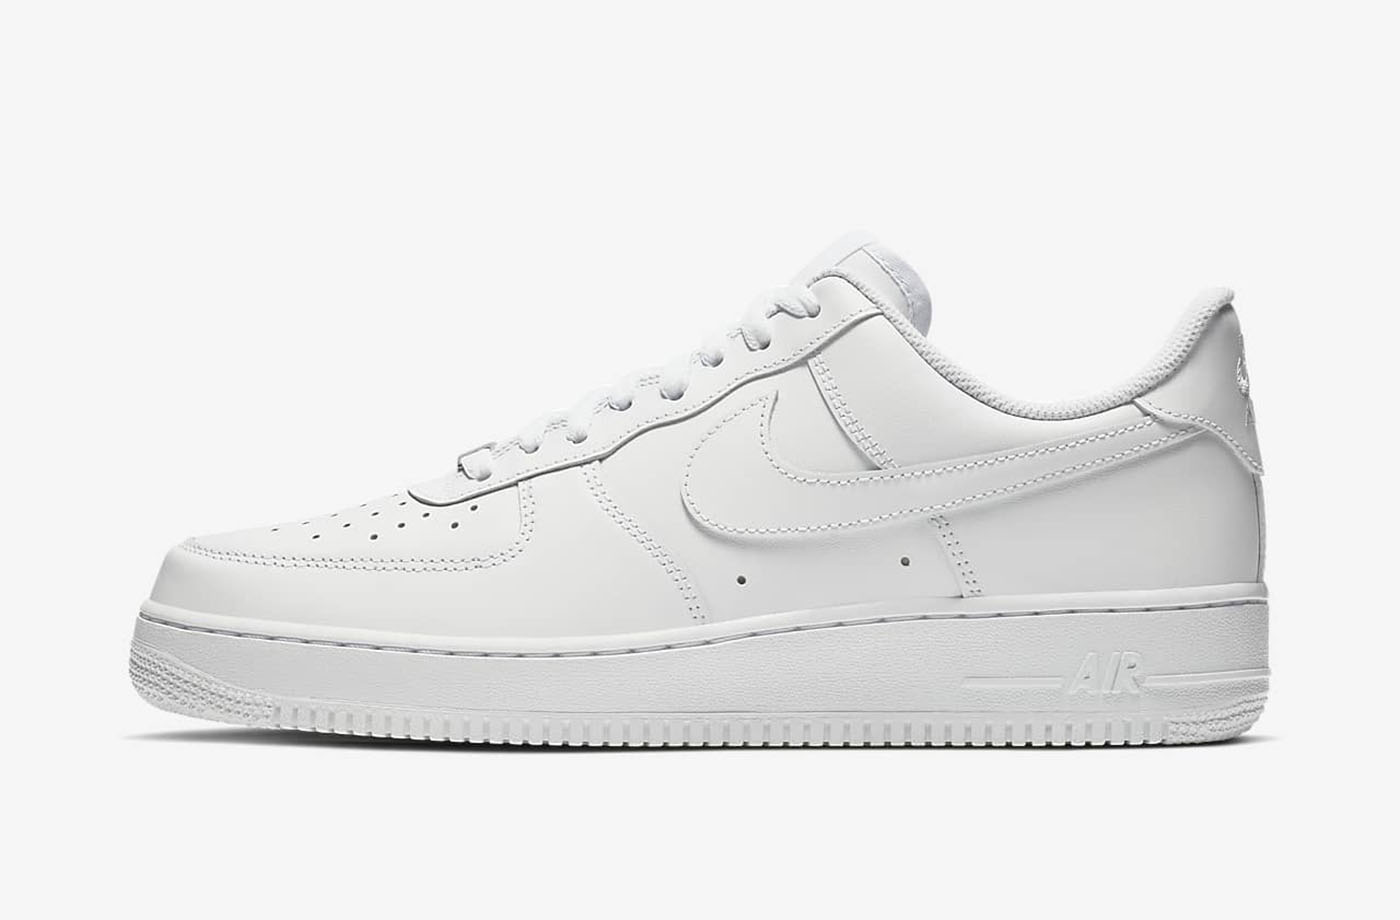 Nike Air Force 1 Retail Price Increase form $90 to $100 | SoleSavy